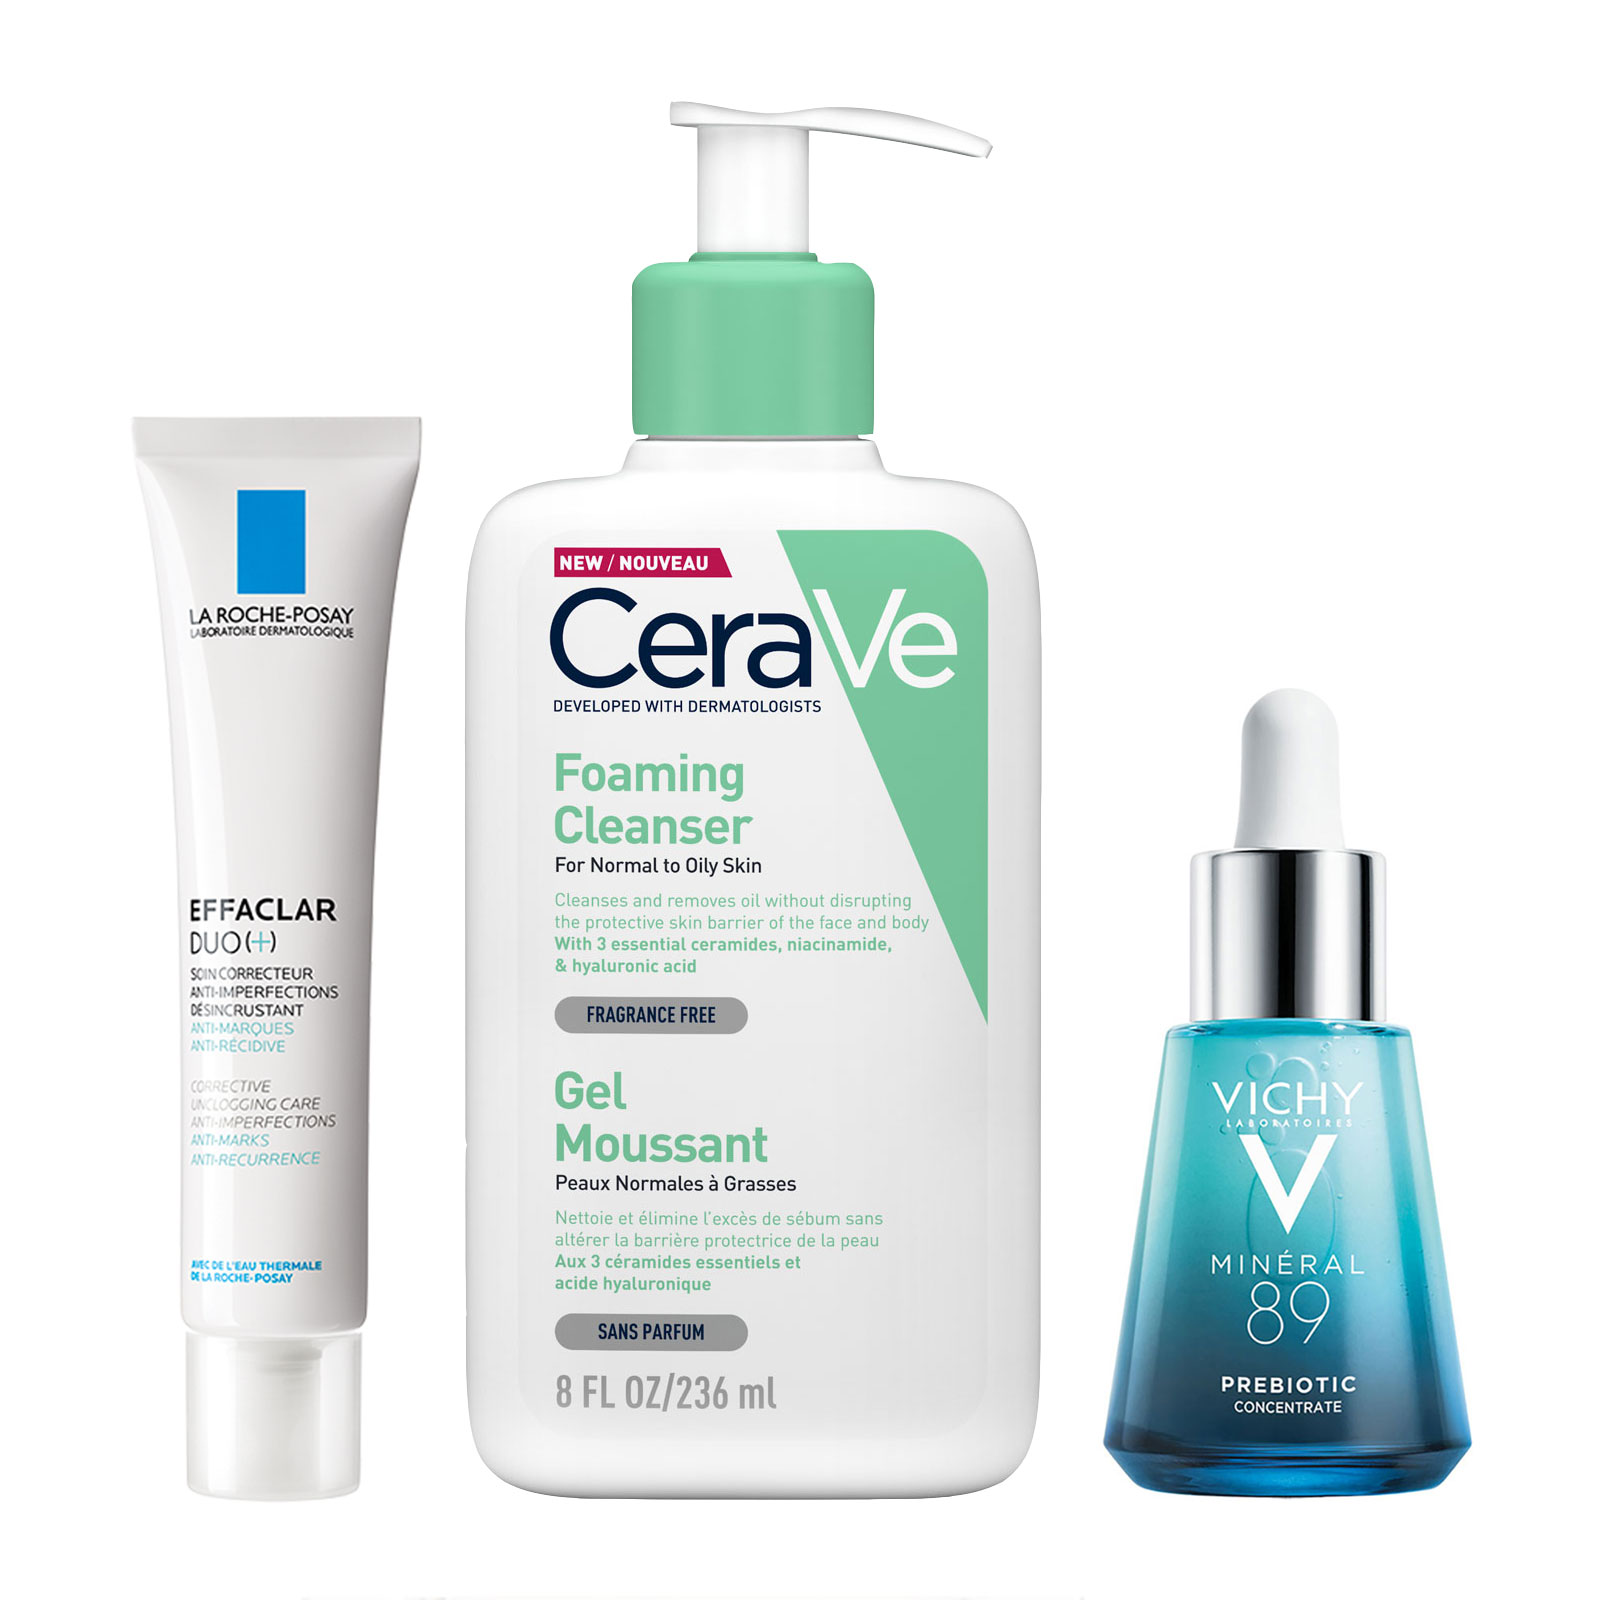 La Roche-Posay x Vichy x CeraVe 3-Step Calming &amp; Clarifying Daily Routine